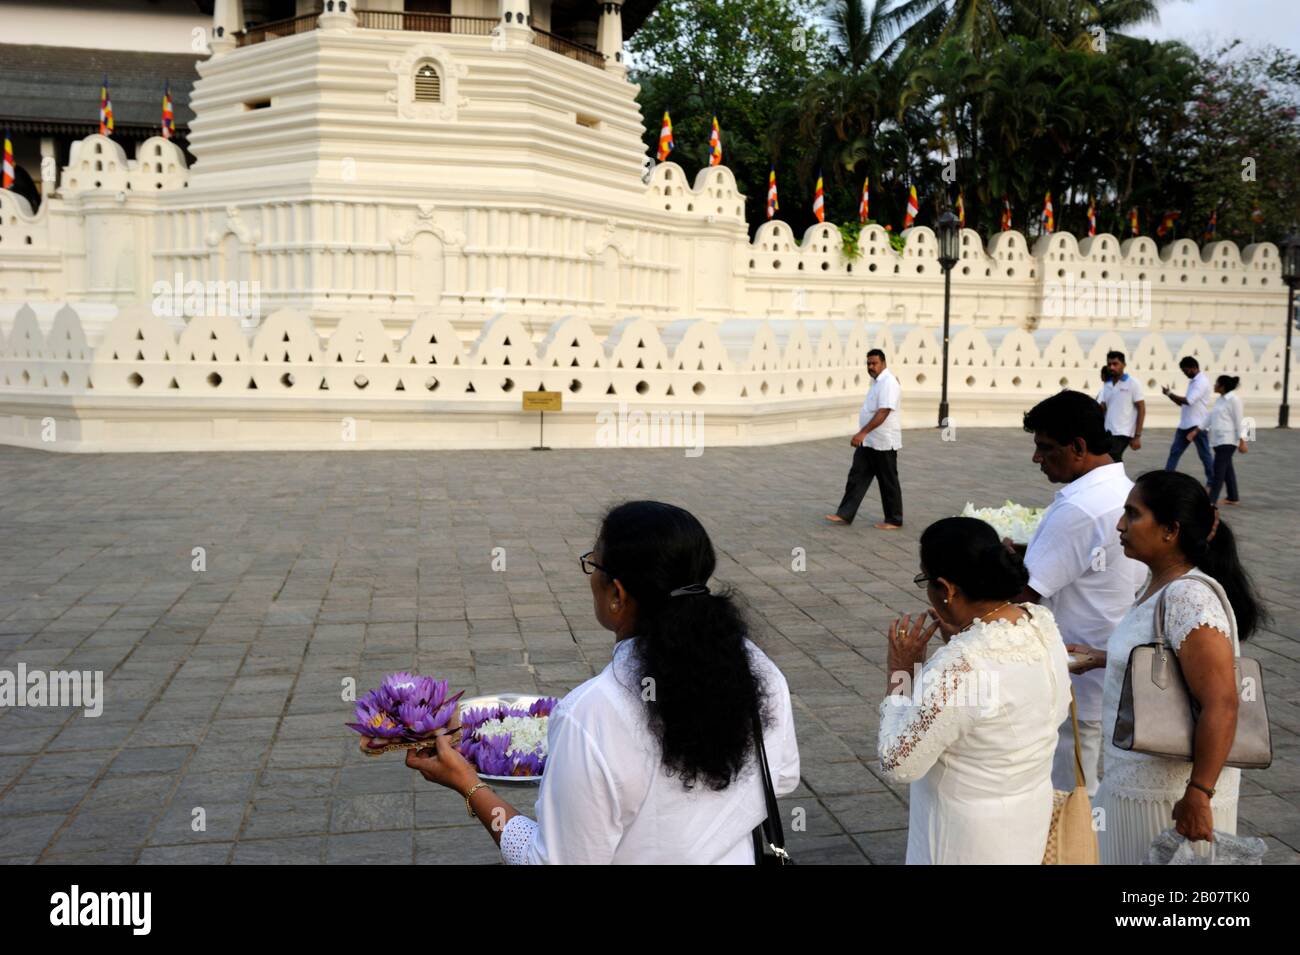 Sri Lanka, Kandy, temple of the tooth, people bringing flower offerings Stock Photo